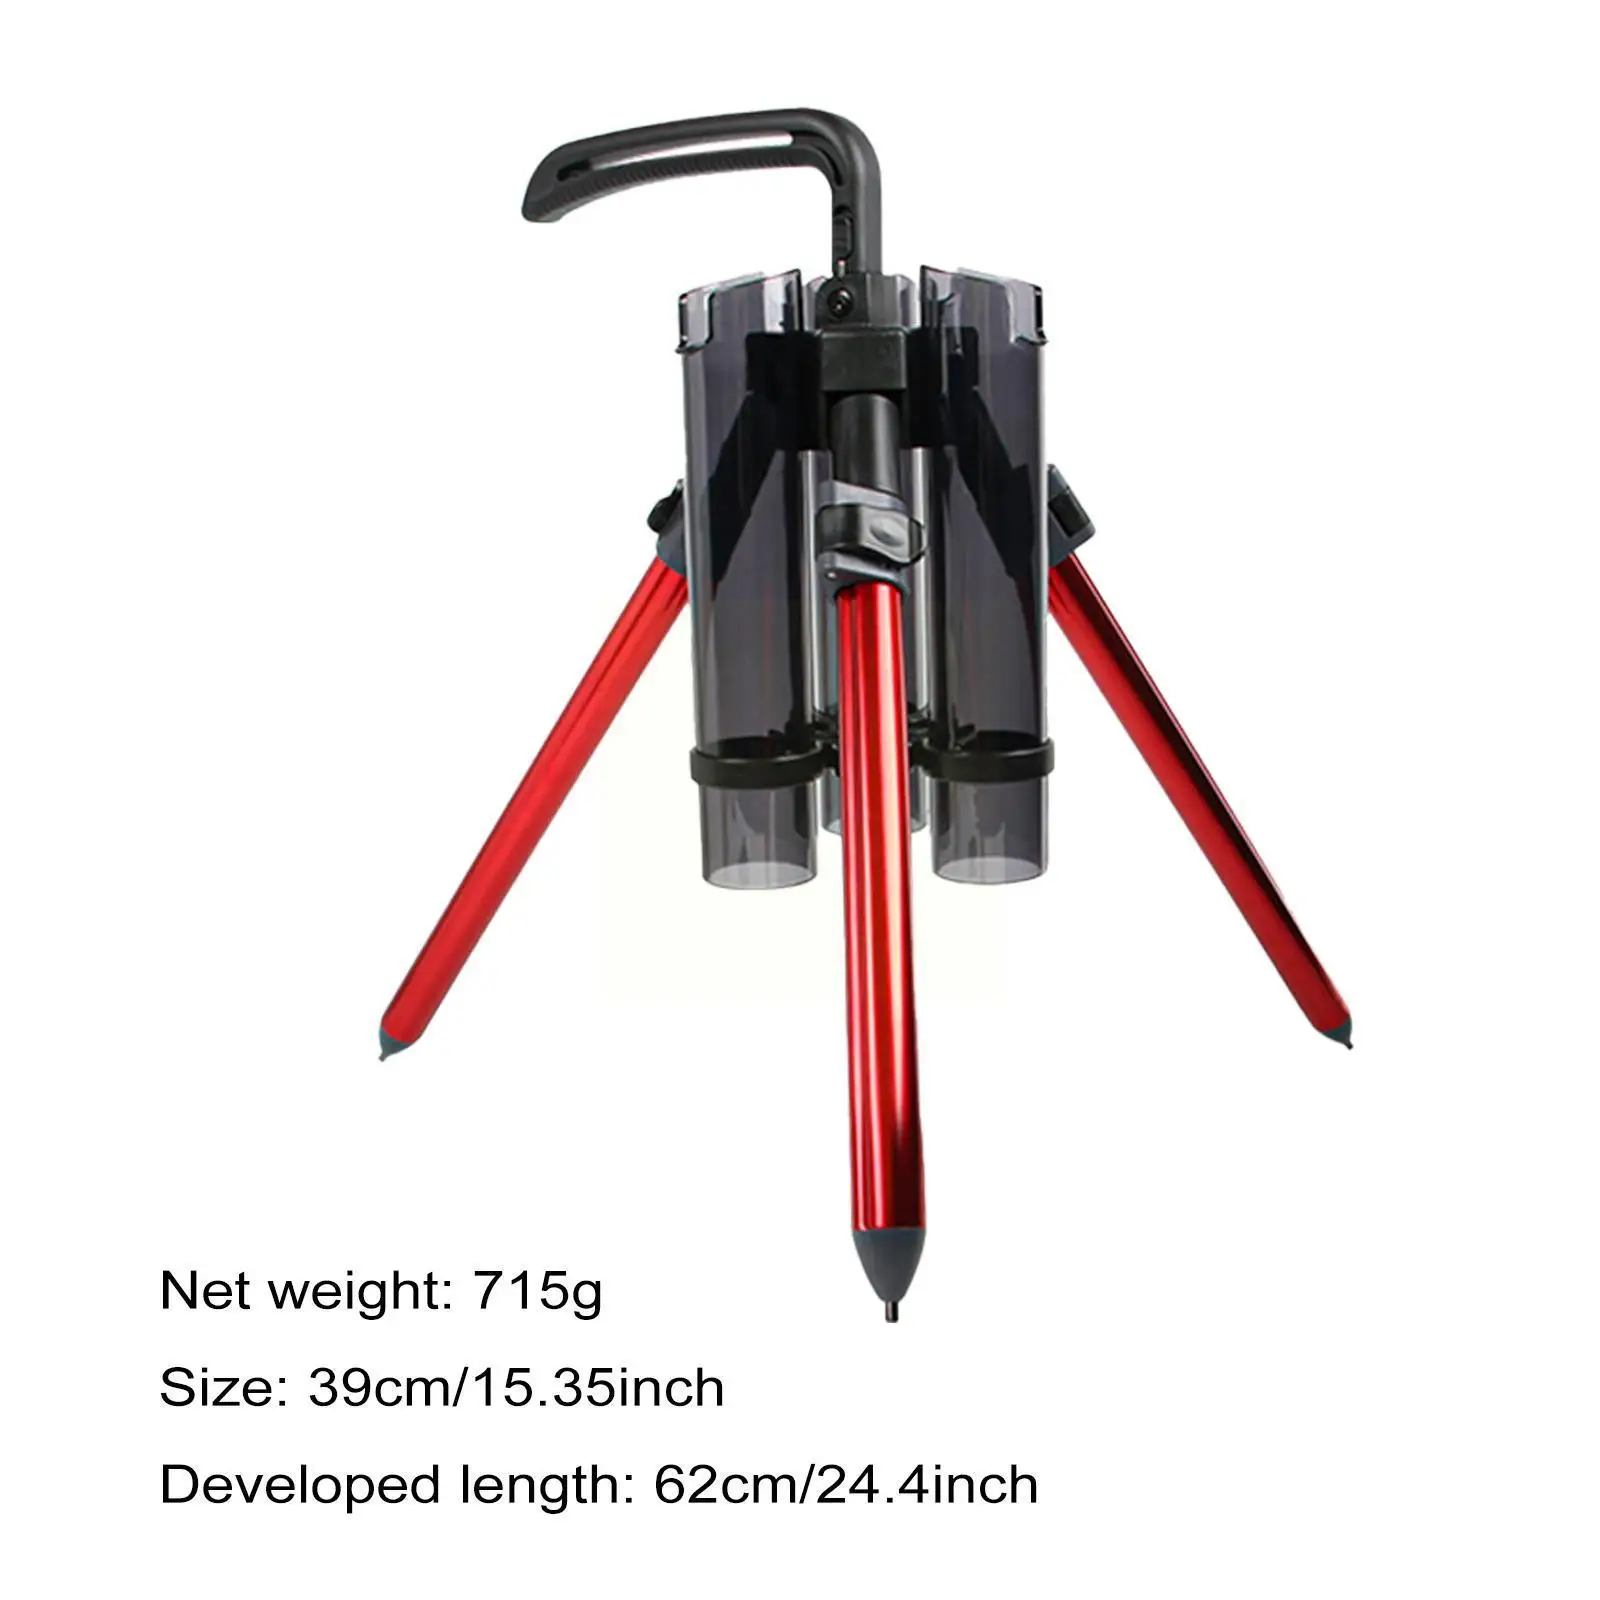 

Presso Rod Stand 530 Fishing Rod Bracket Tripod Stand Folding Portable Outdoor Fishing Rod Support Fishing Accessories R0n2